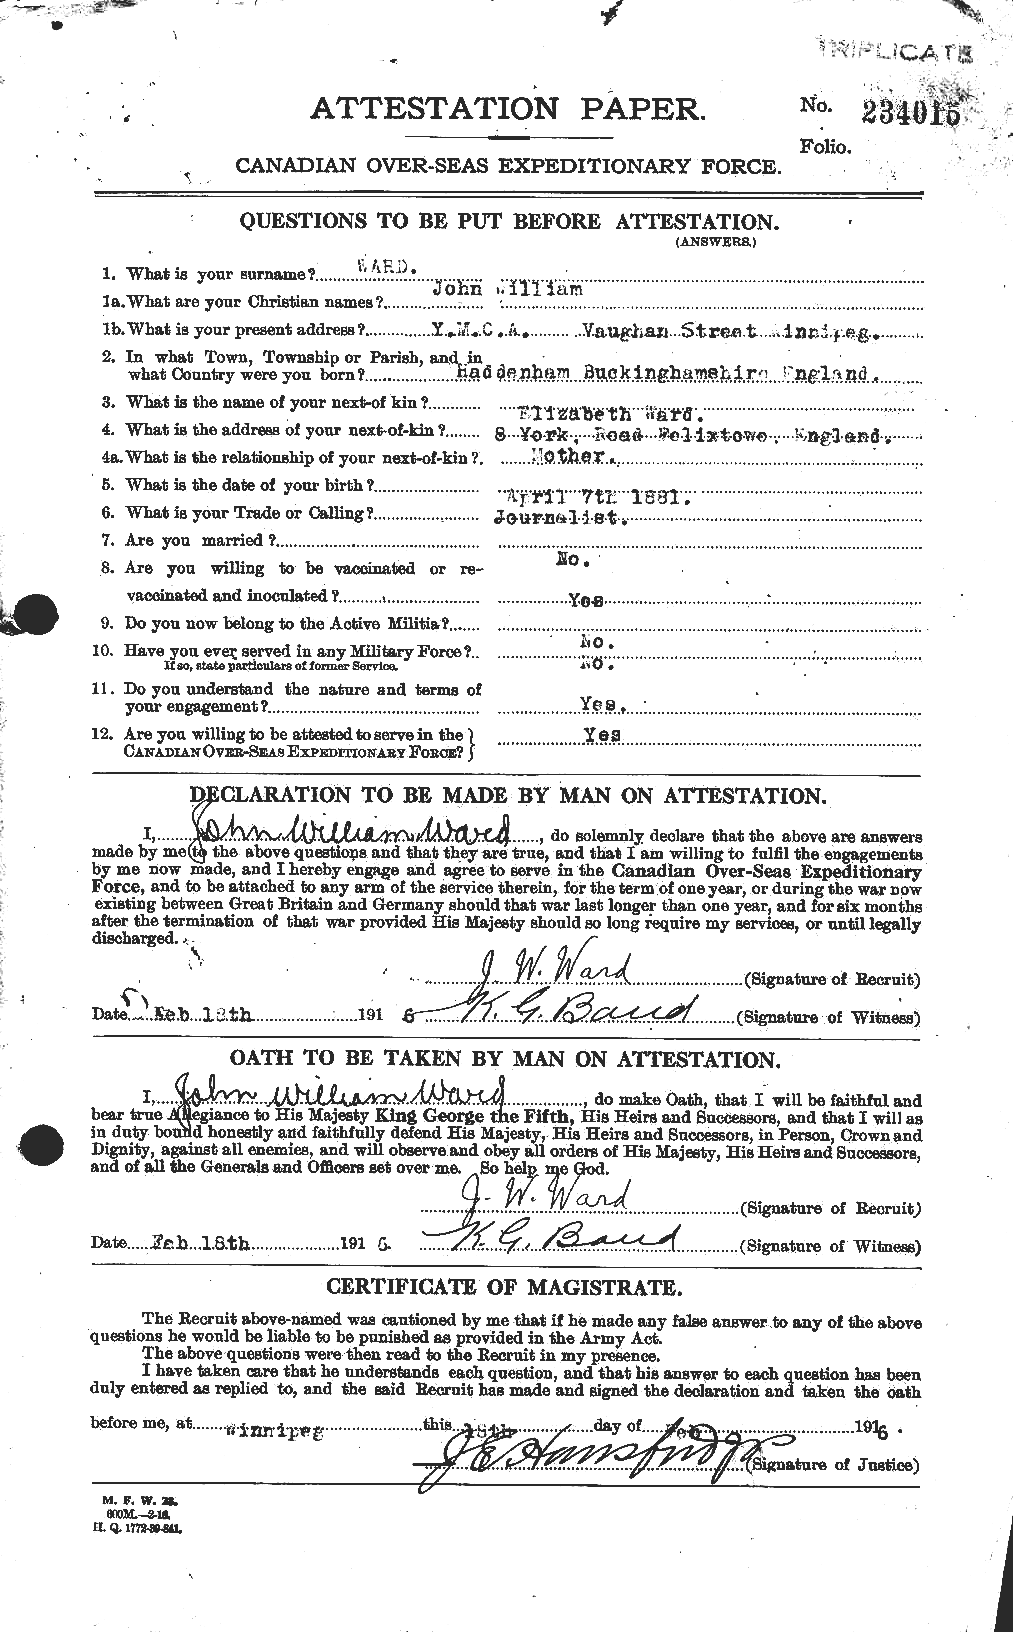 Personnel Records of the First World War - CEF 659542a